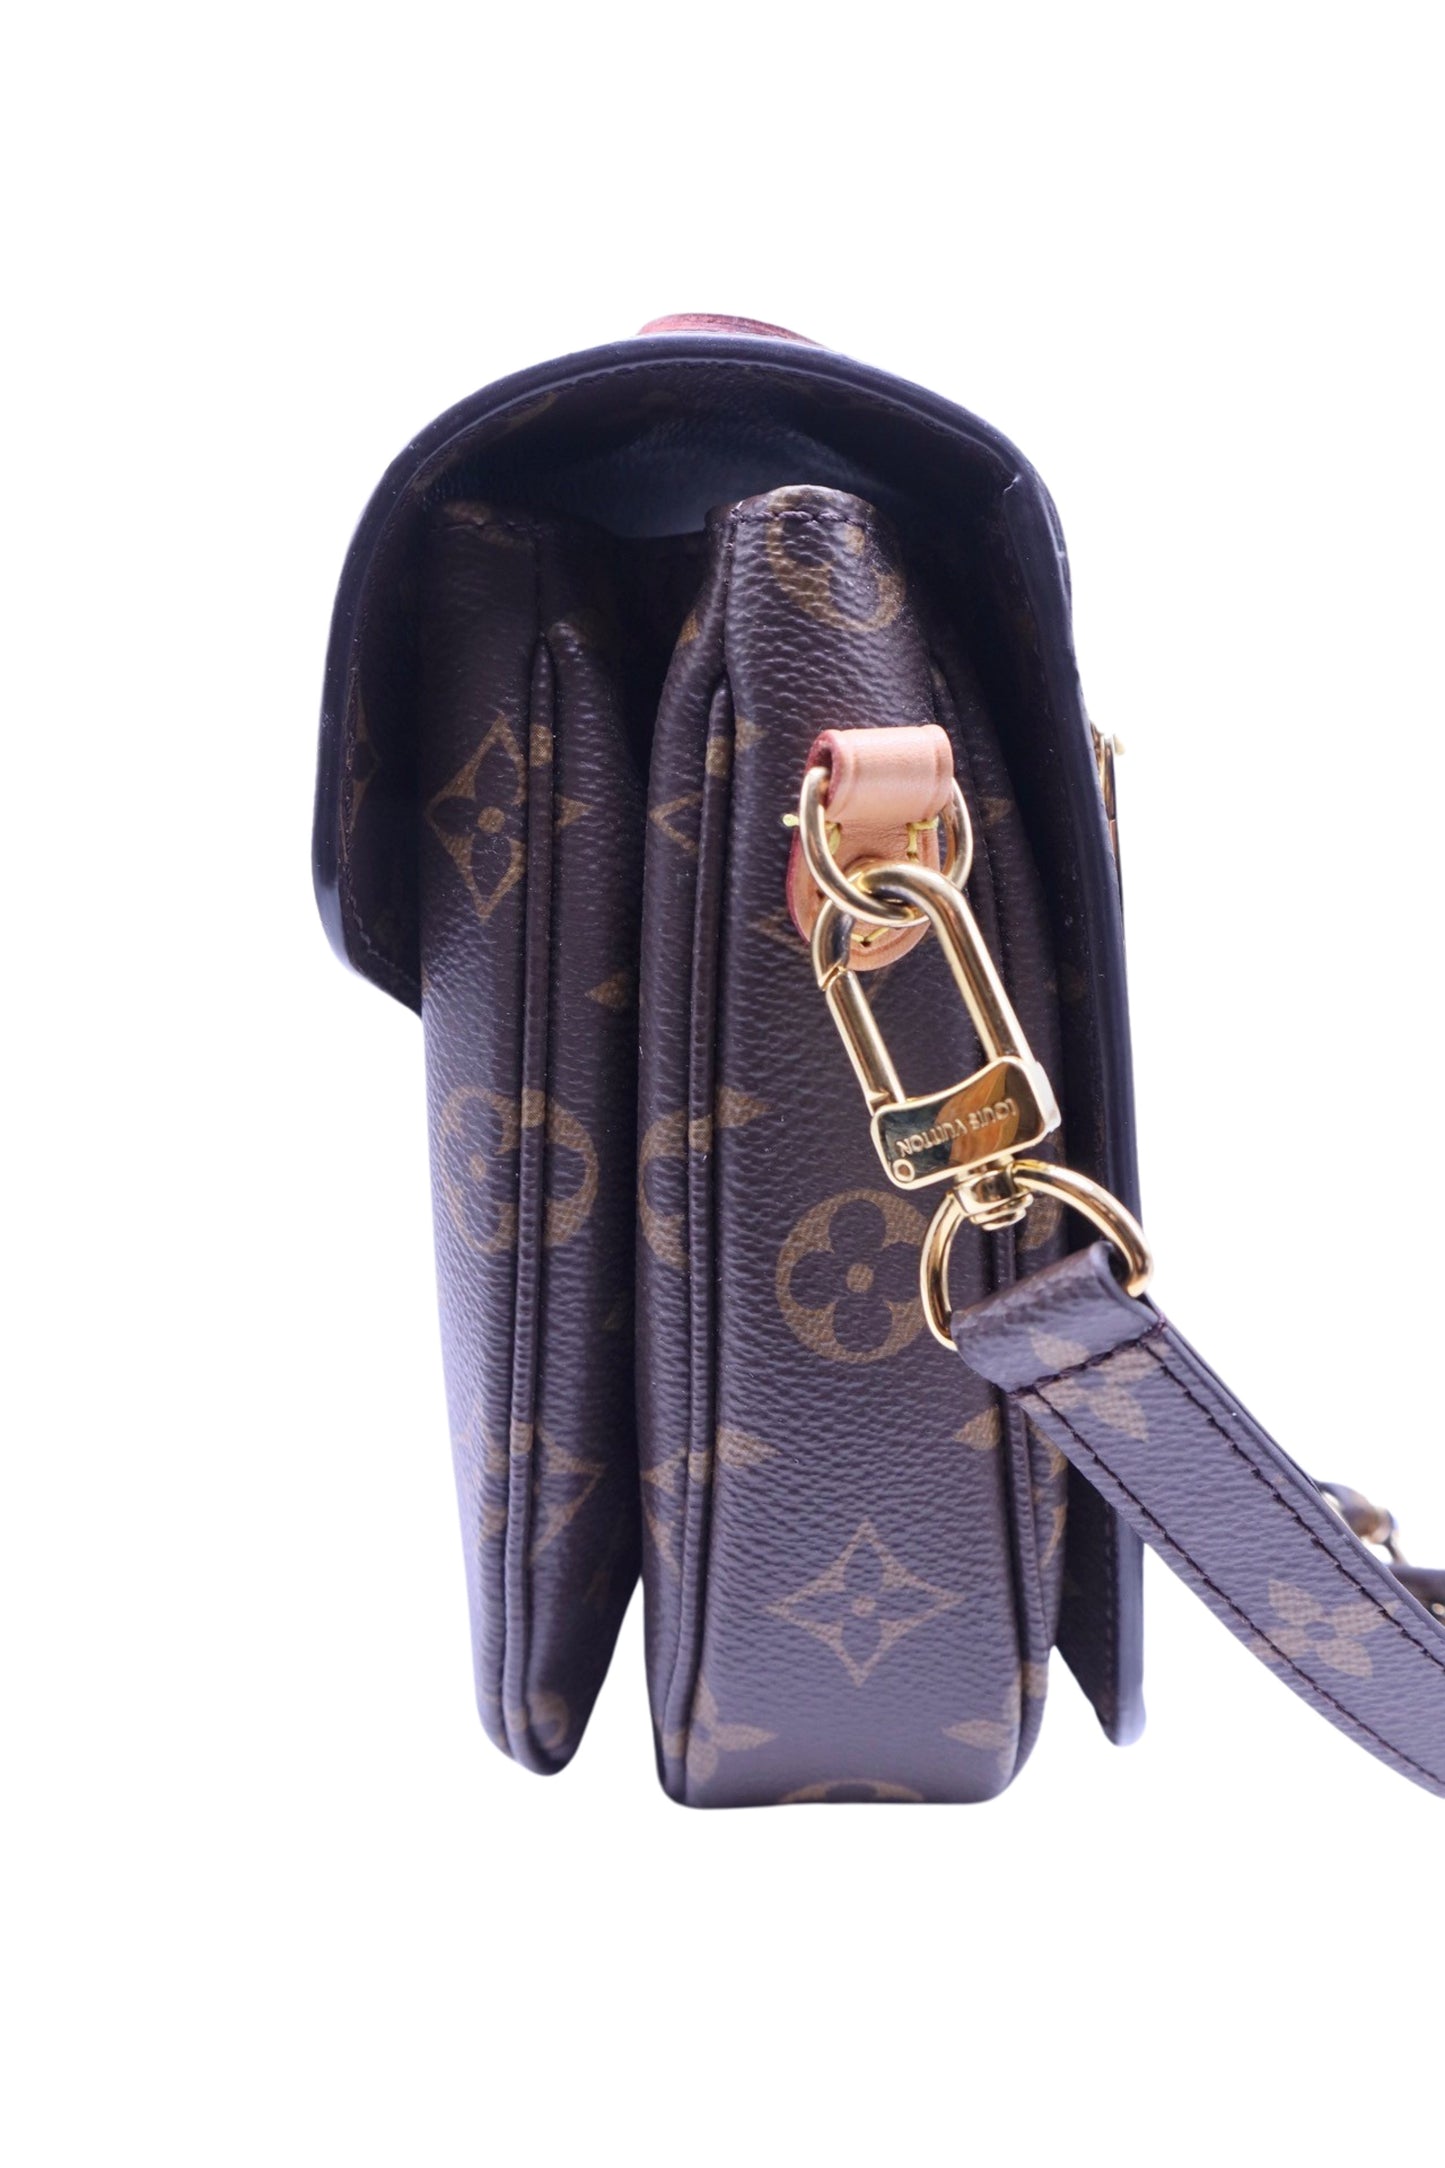 Side of handbag with Louis Vuitton removable strap with gold hardware